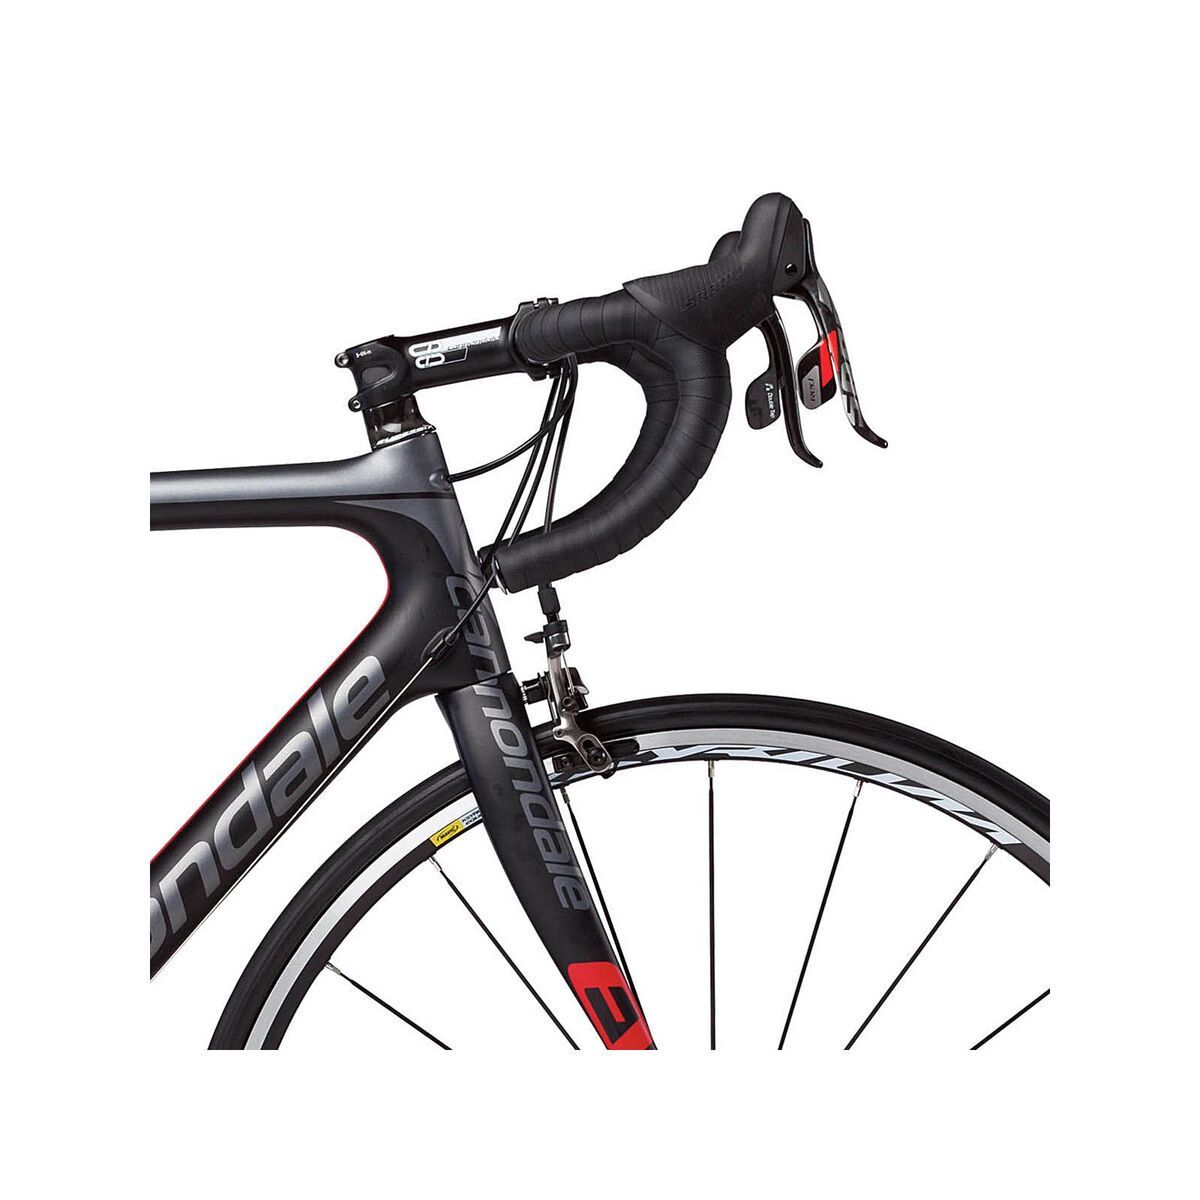 *** 2. Wahl *** Cannondale SuperSix Evo 2 Red 2013, exposed carbon w/ charcoal gray matte - Rennrad | Rahmenhöhe 58 cm | Bild 5